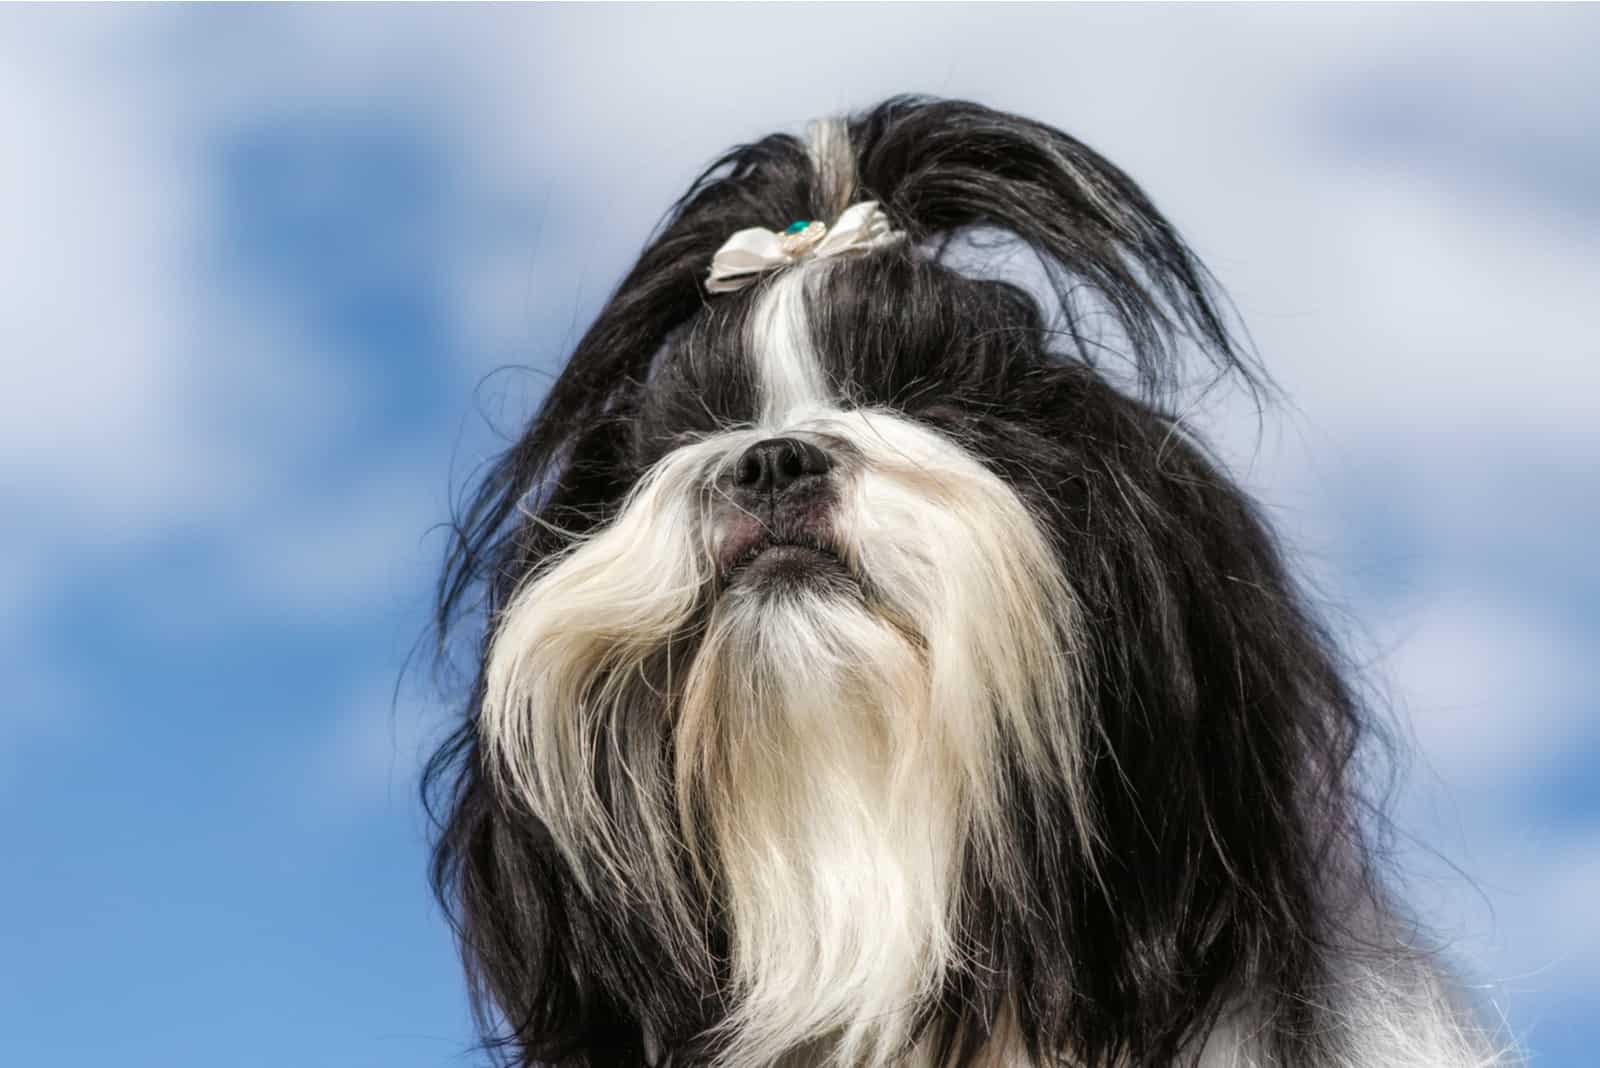 Shih Tzu dog on a background of blue sky and clouds